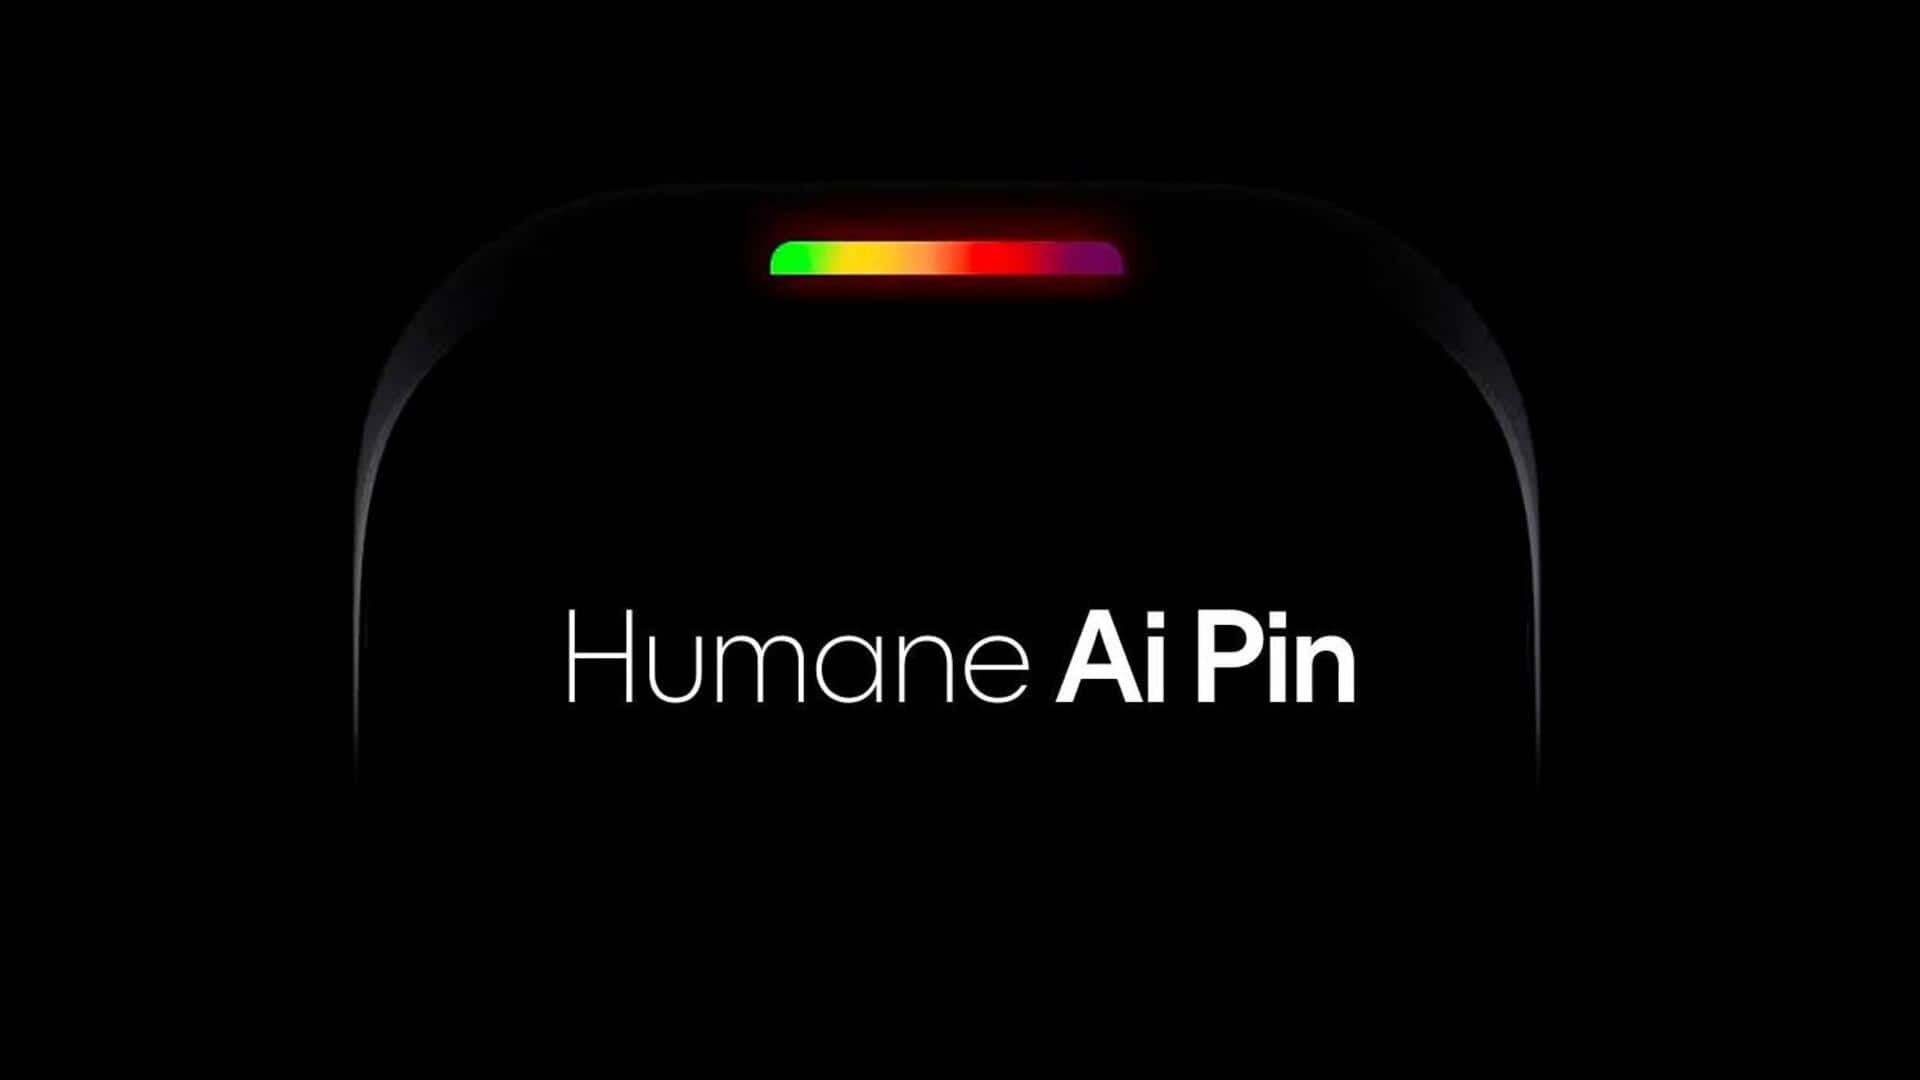 Sam Altman-backed start-up to unveil 'Ai Pin' on November 9